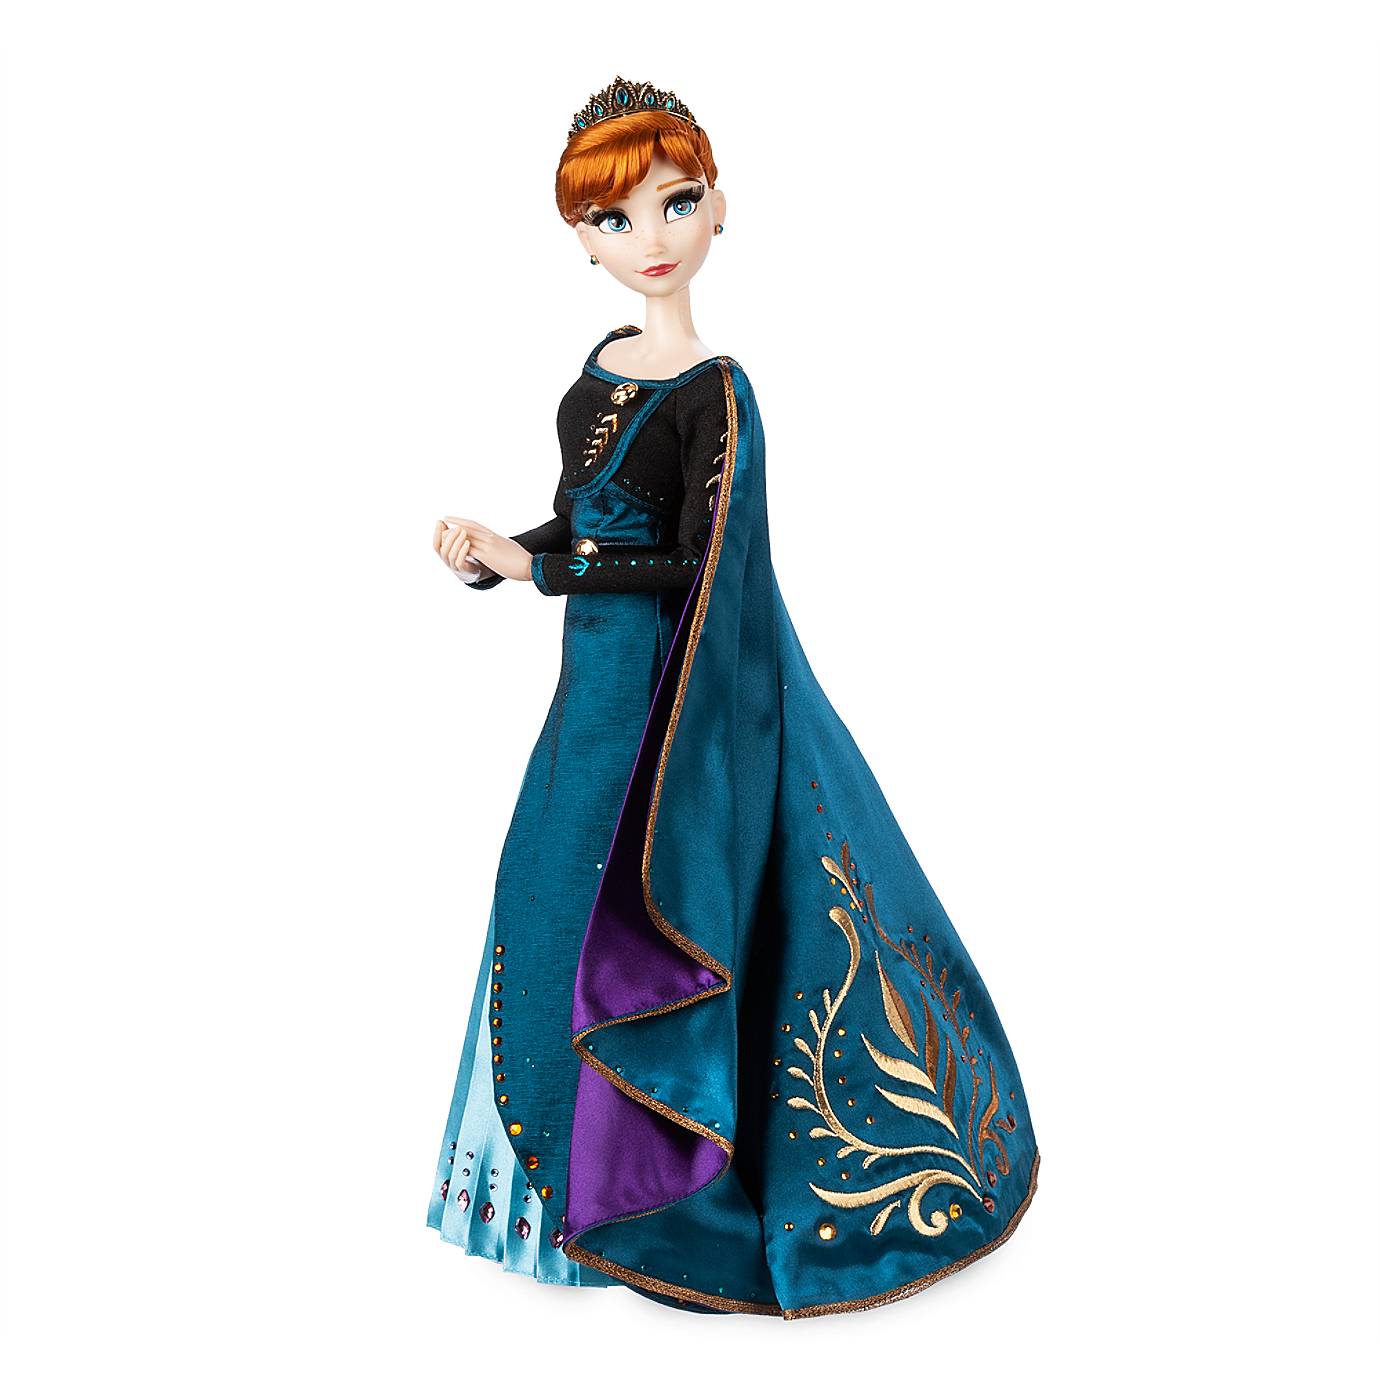 Disney Frozen 2 Queen Anna Limited Edition Doll New with Box